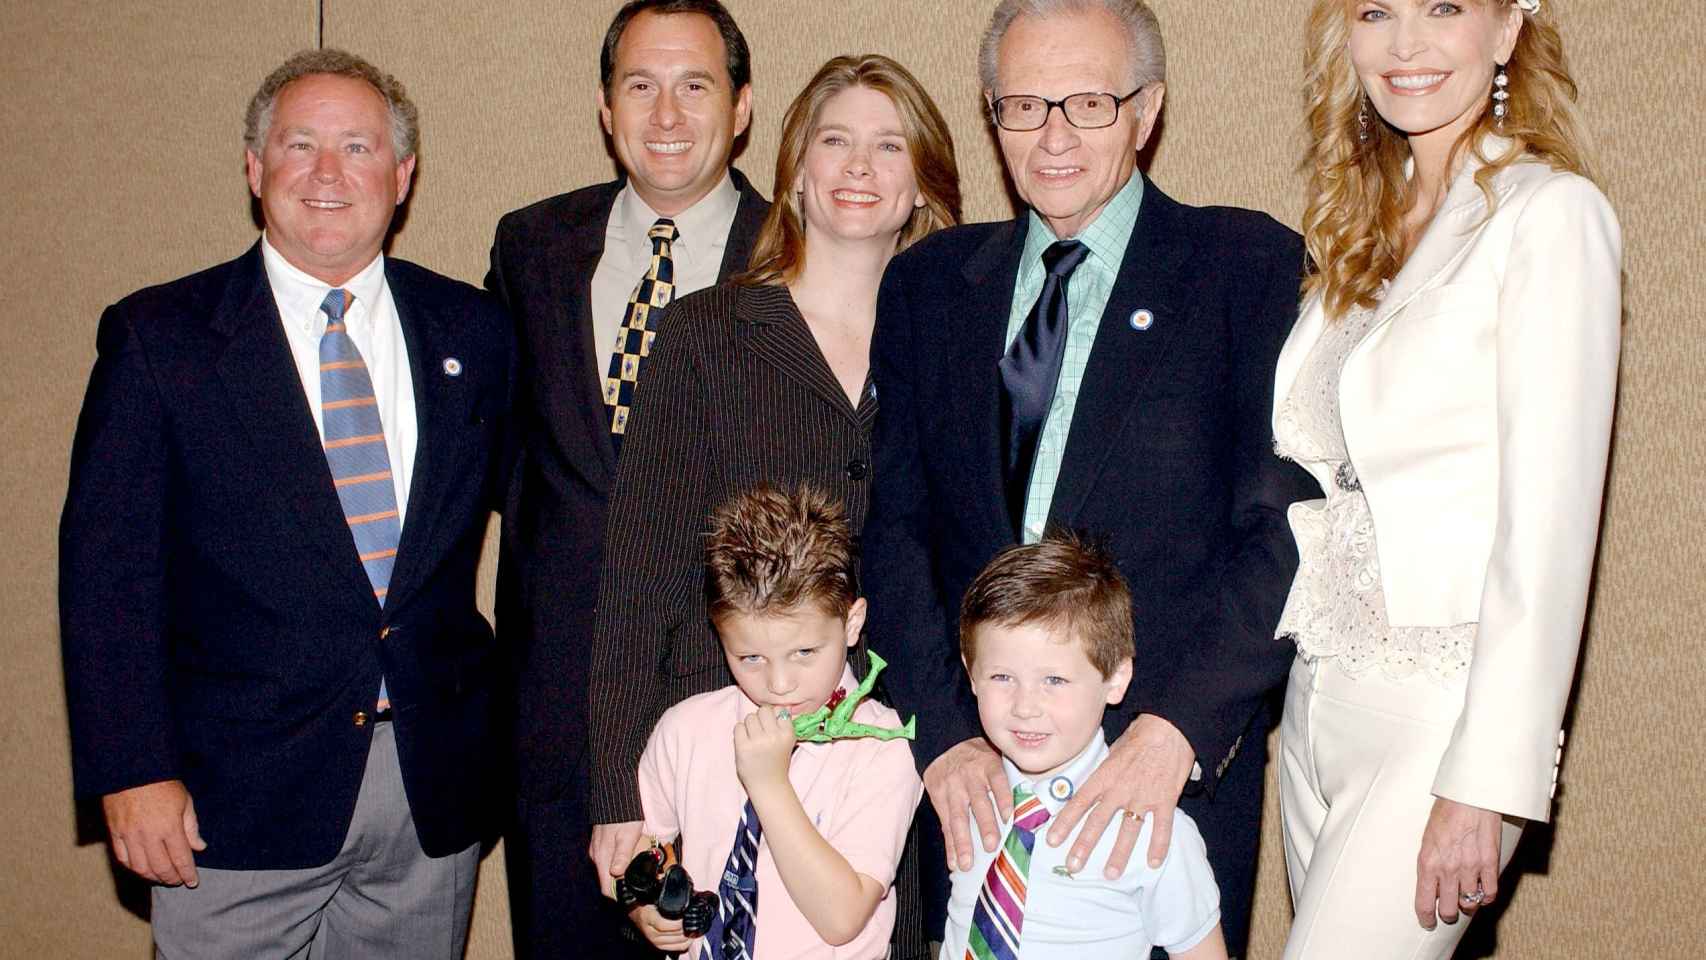 Larry King con sus hijos Chance, Cannon, Chaia, Andy, Larry Jr. y su mujer Shawn.